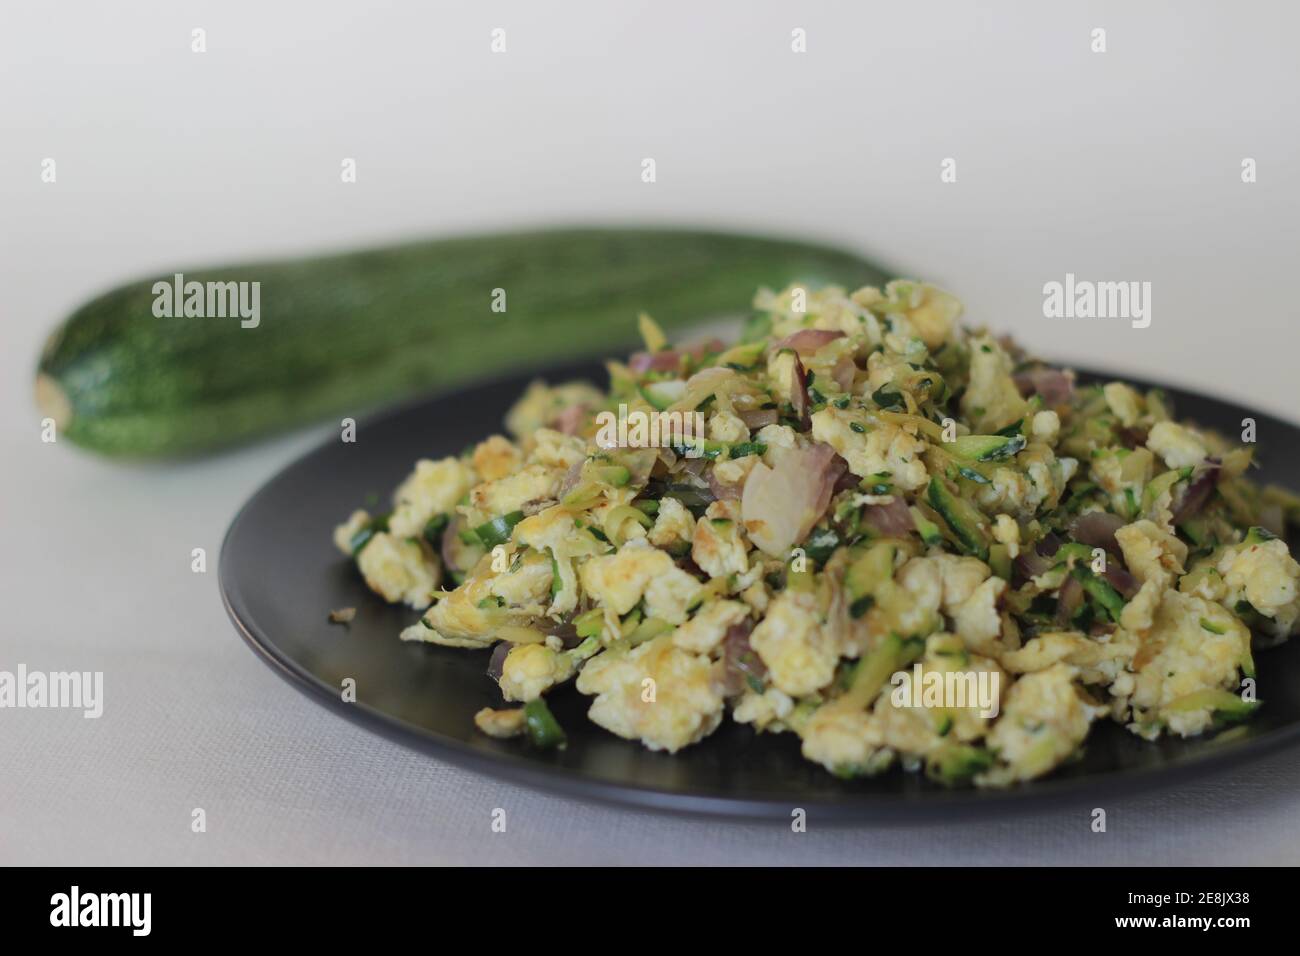 Scrambled Eggs With grated green Zucchini as a healthy breakfast Stock Photo